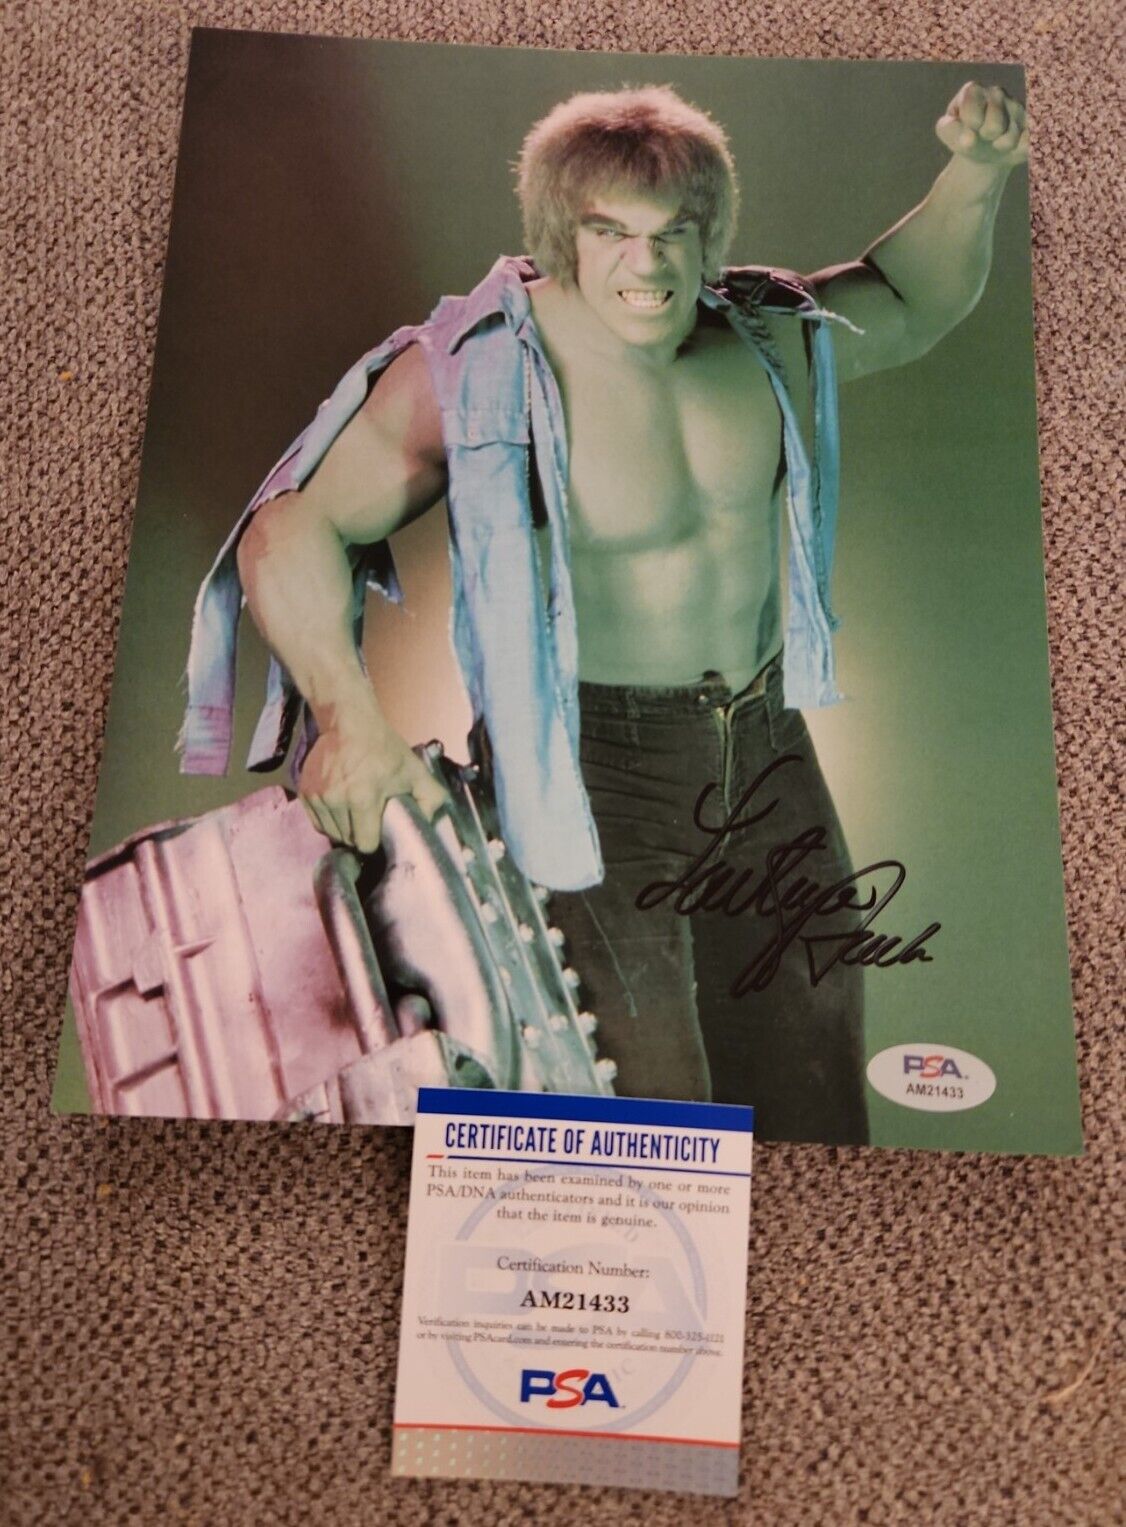 LOU FERRIGNO SIGNED 8X10 PHOTO INCREDIBLE HULK MUSCLES PSA/DNA CERT #AM21433 WOW